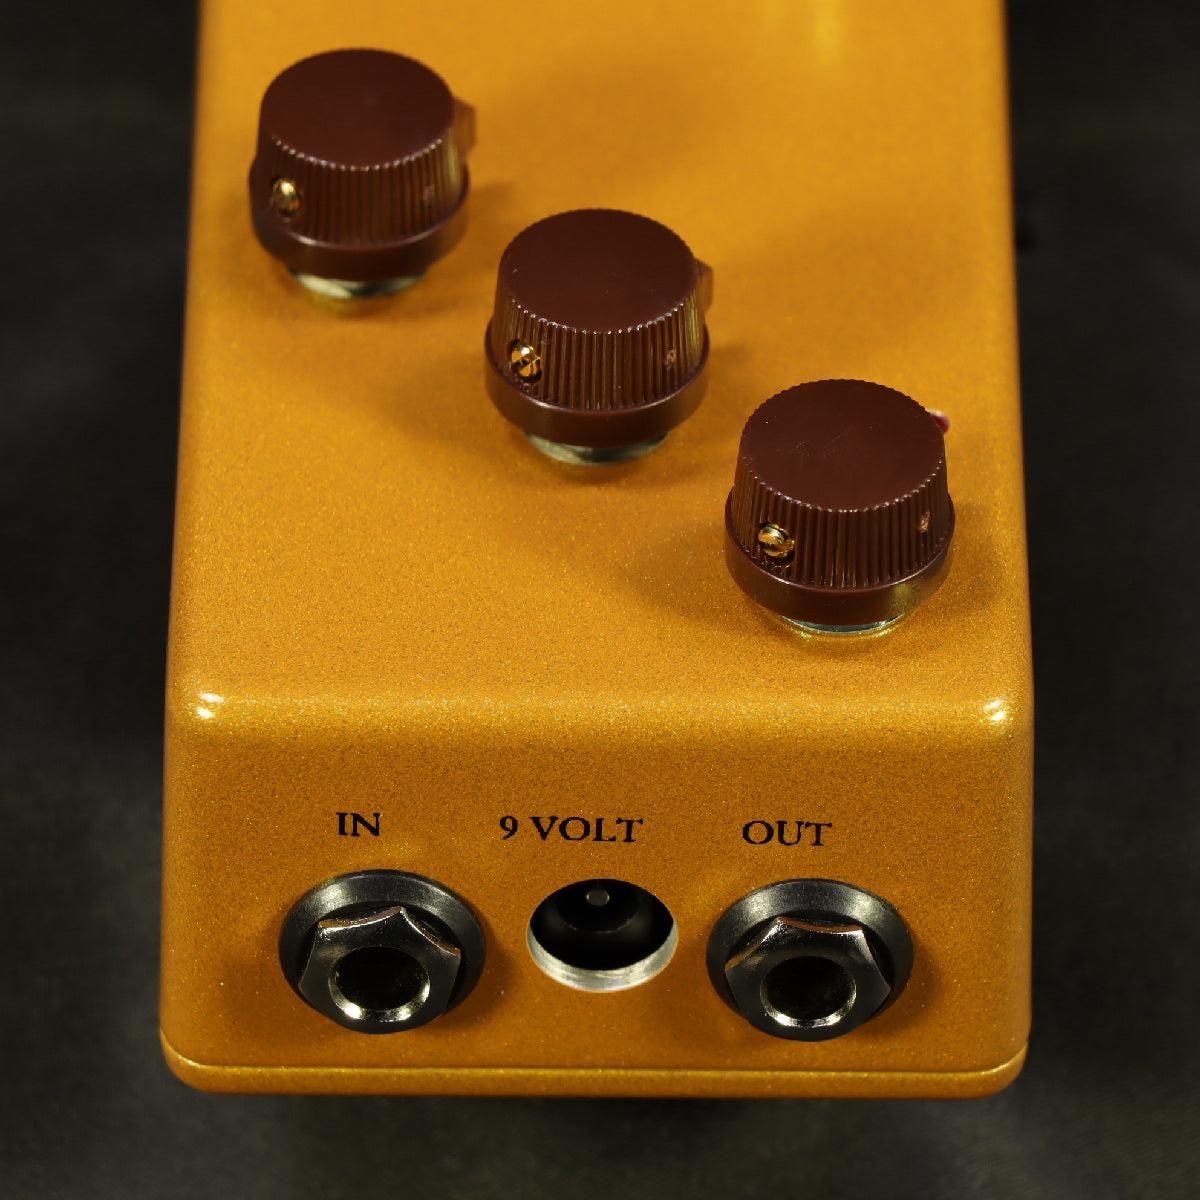 HTJ-WORKS / -Bright Horse- Nopicture Gold Overdrive Handmade in Japan [80]